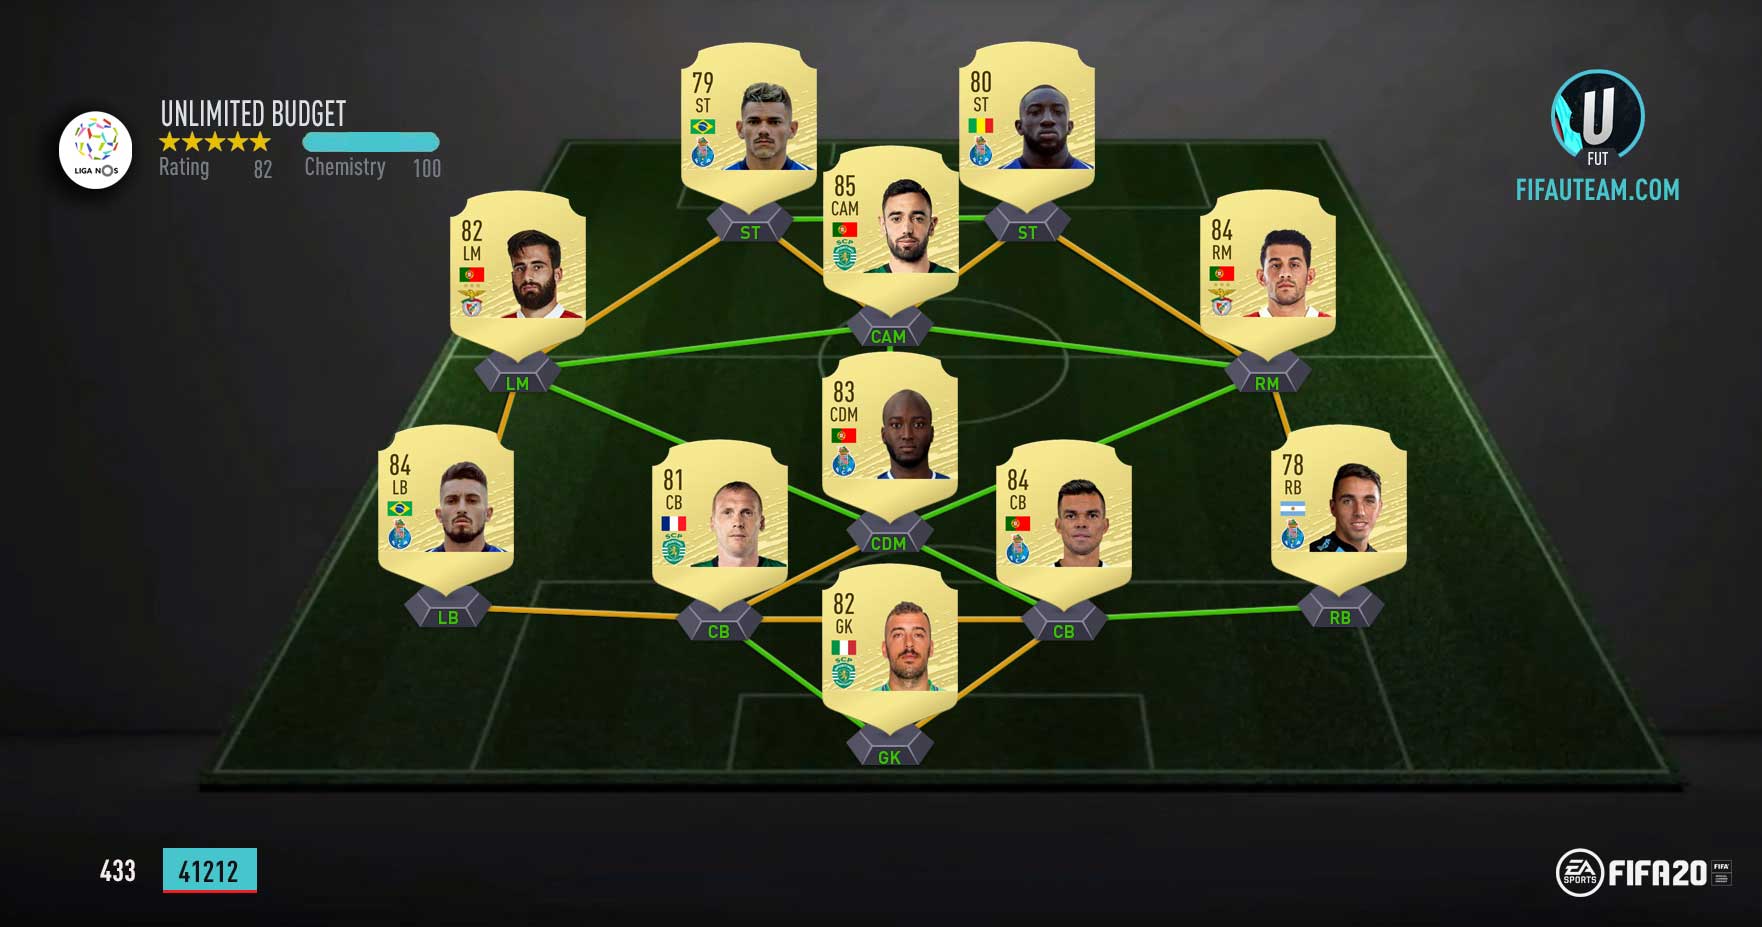 The Best Leagues to Play on FIFA 20 Ultimate Team